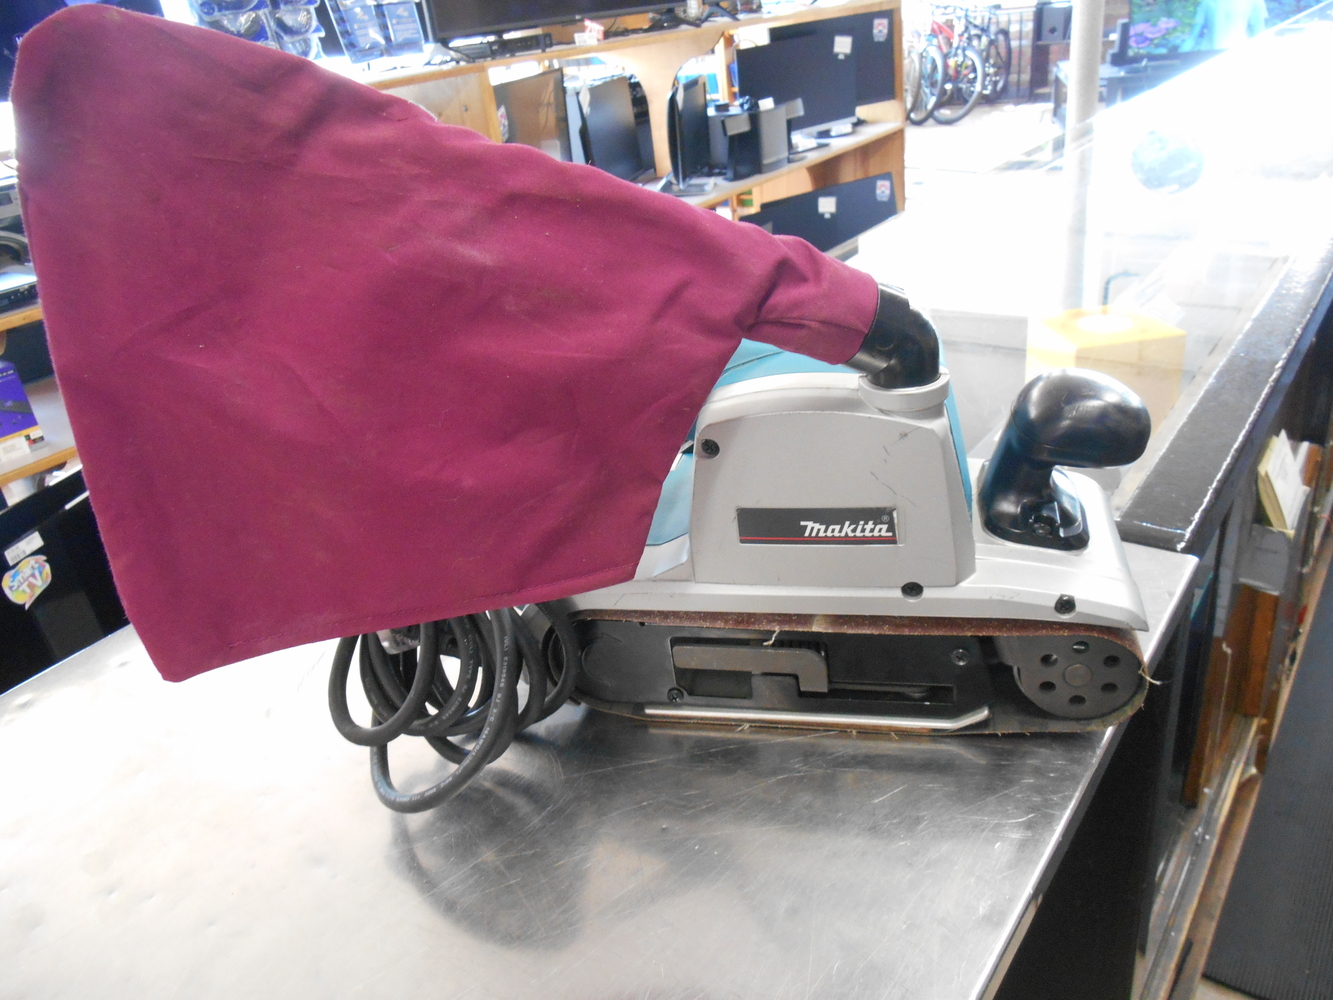 Makita11 Amp 4 in. x 24 in. Corded Belt Sander with Abrasive Belt and Dust Bag